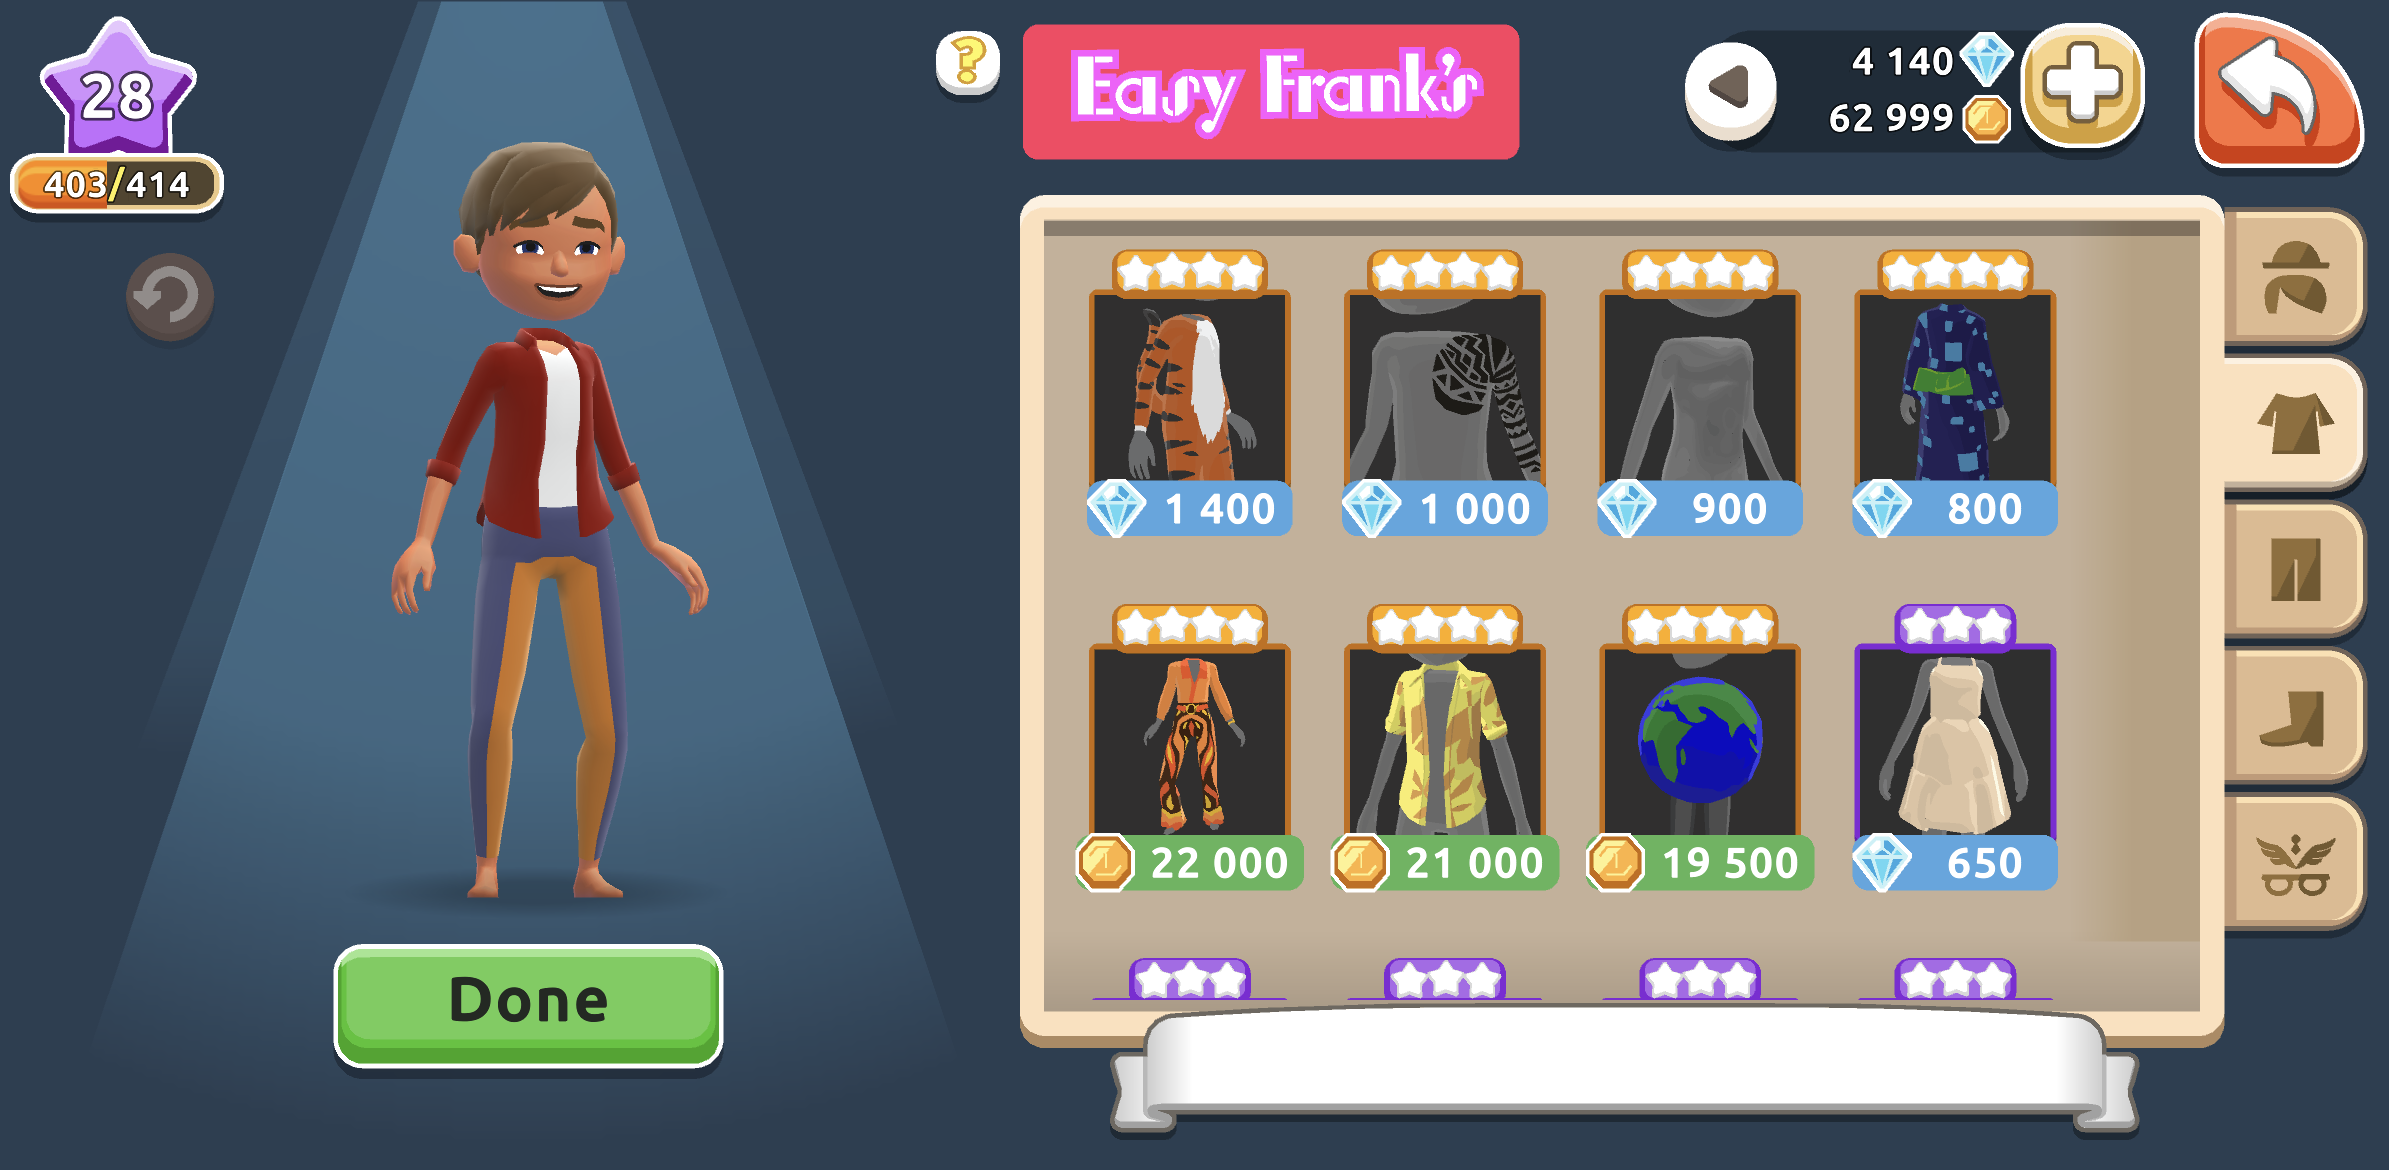 Overview of Easy Frank's shop